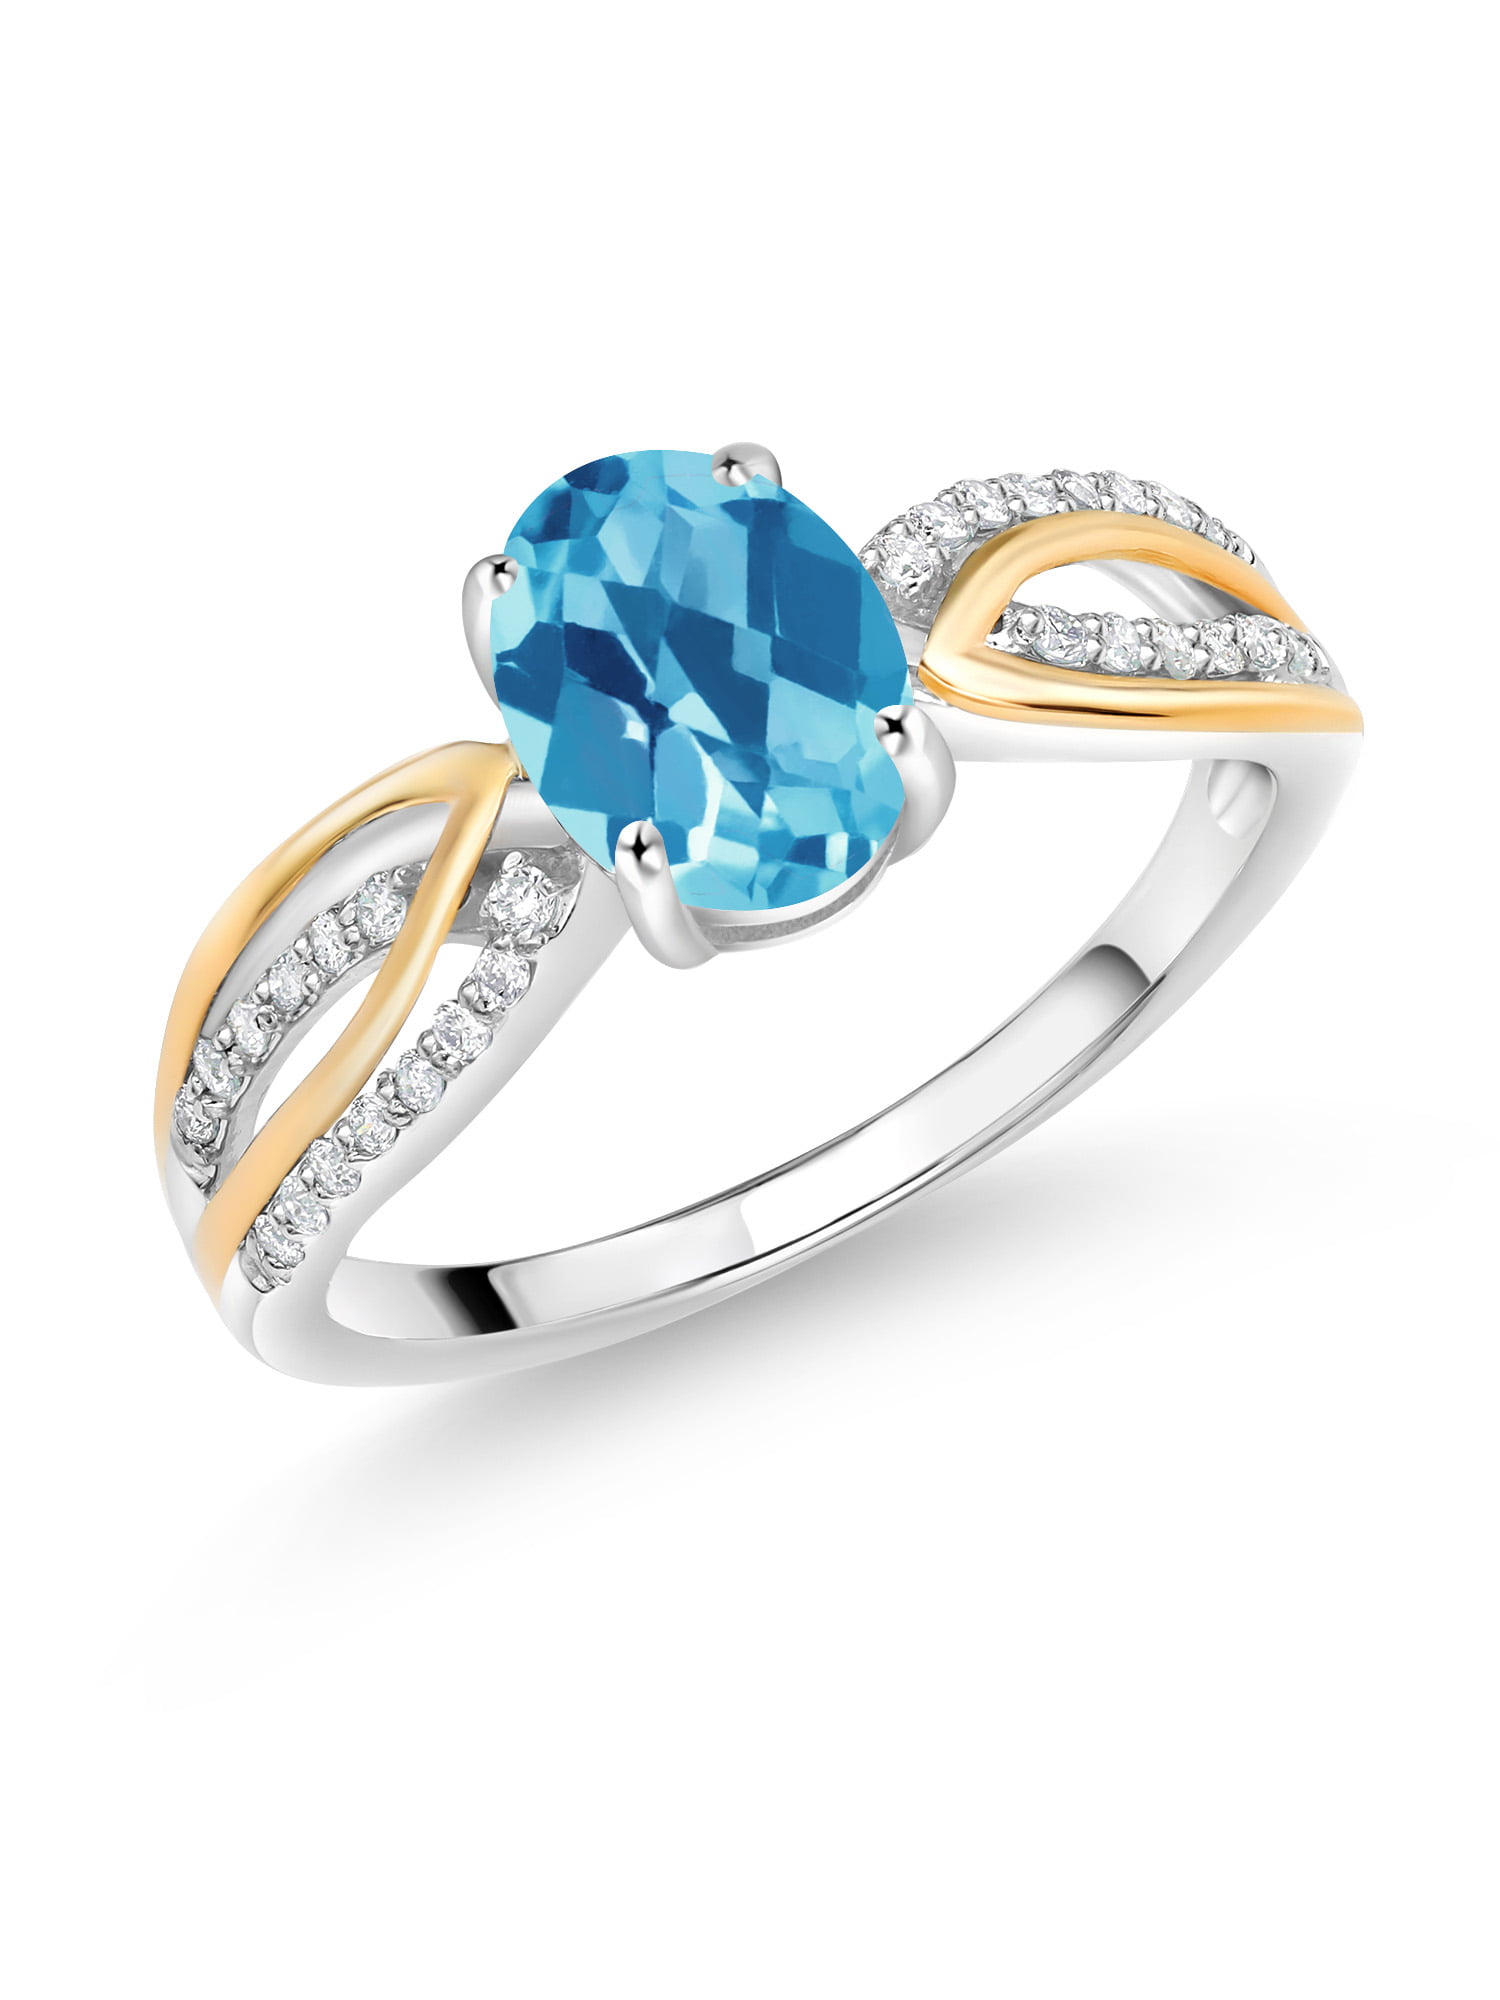 Gem Stone King 0.60 Ct Swiss Blue VS Topaz 18K Rose Gold Plated Silver Mens Solitaire Ring